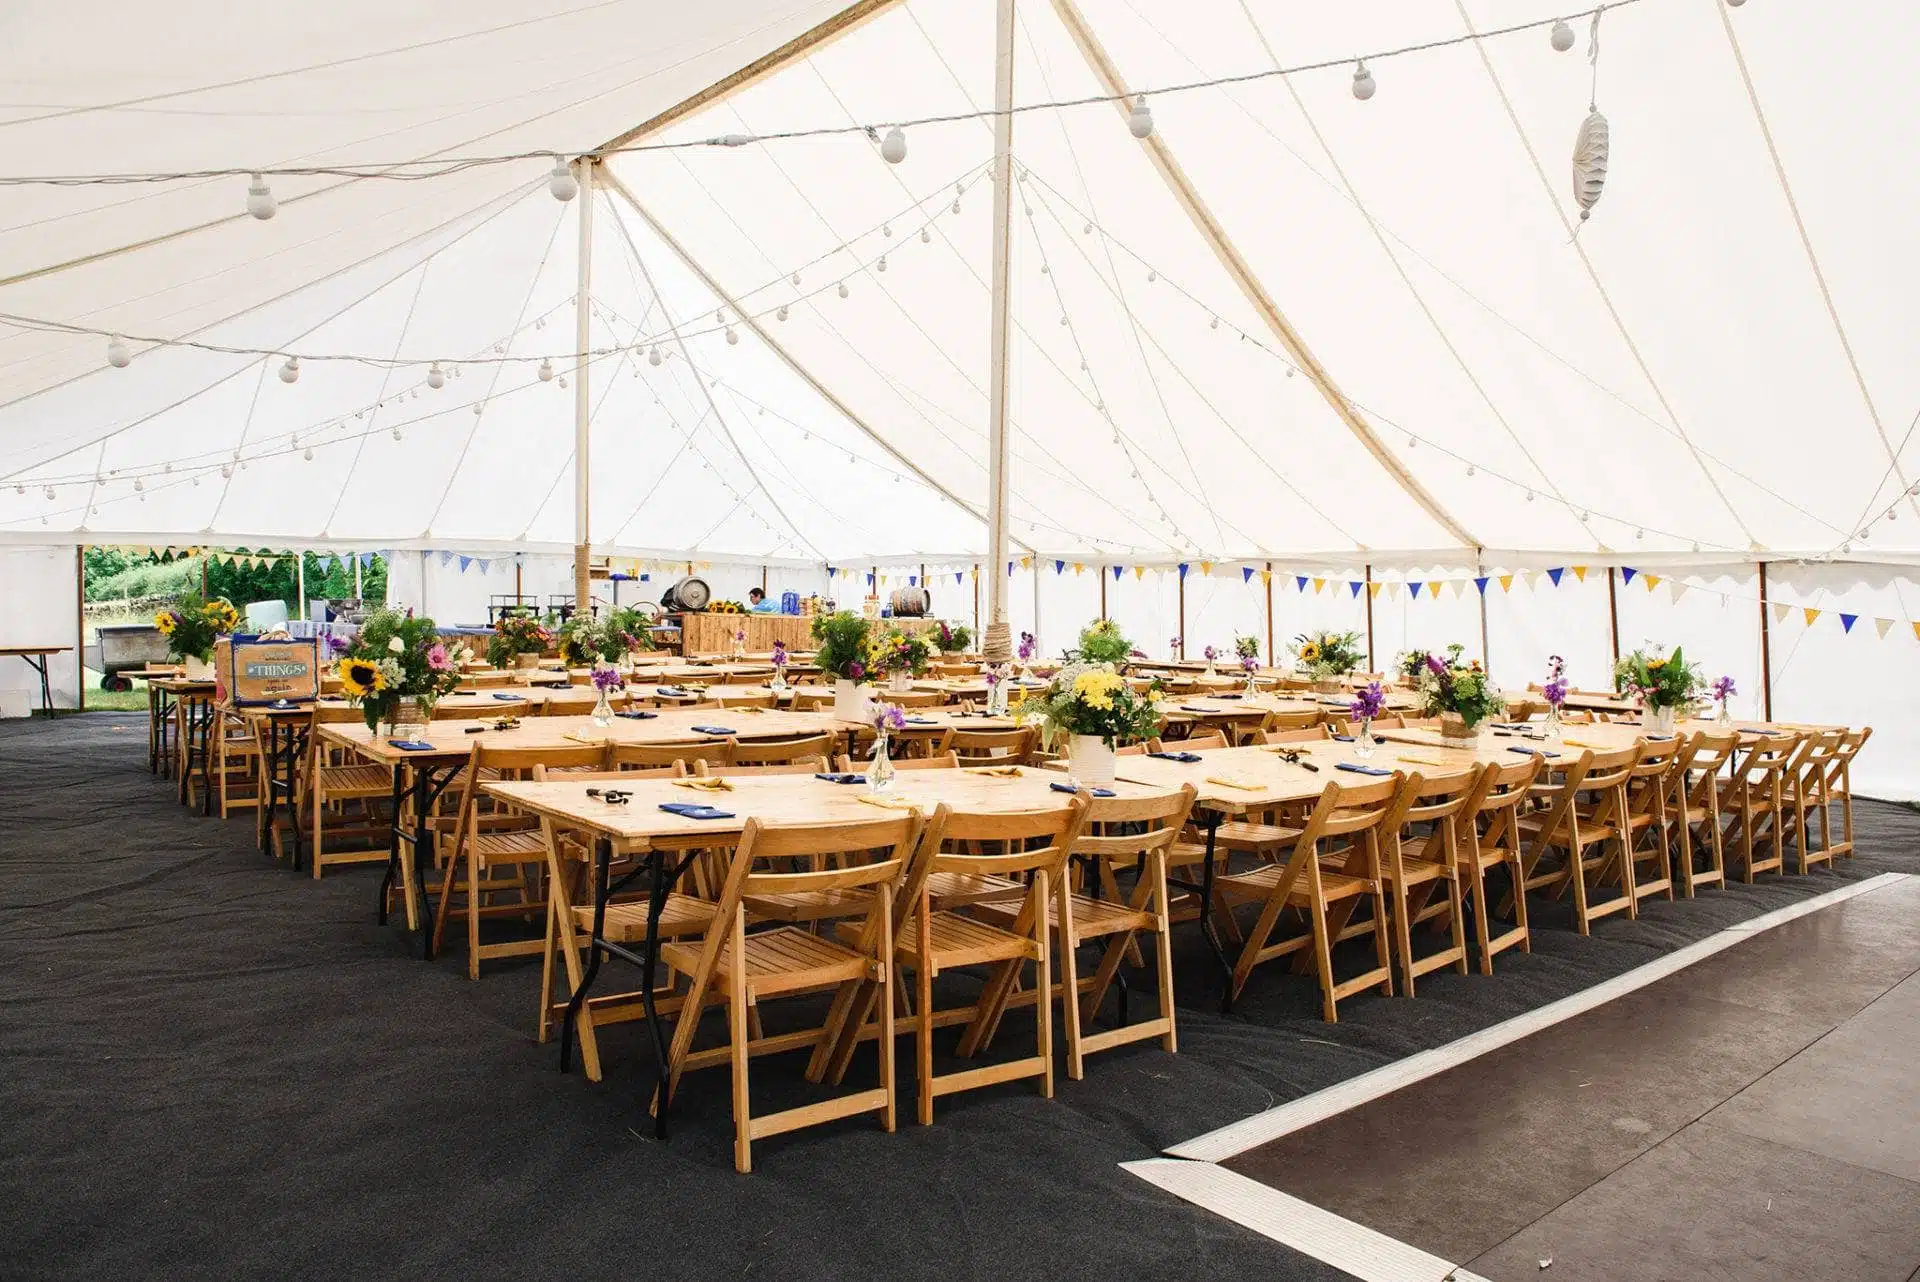 Inside of the tent with long rows of tables and chairs decorated for DIY Marquee summer wedding